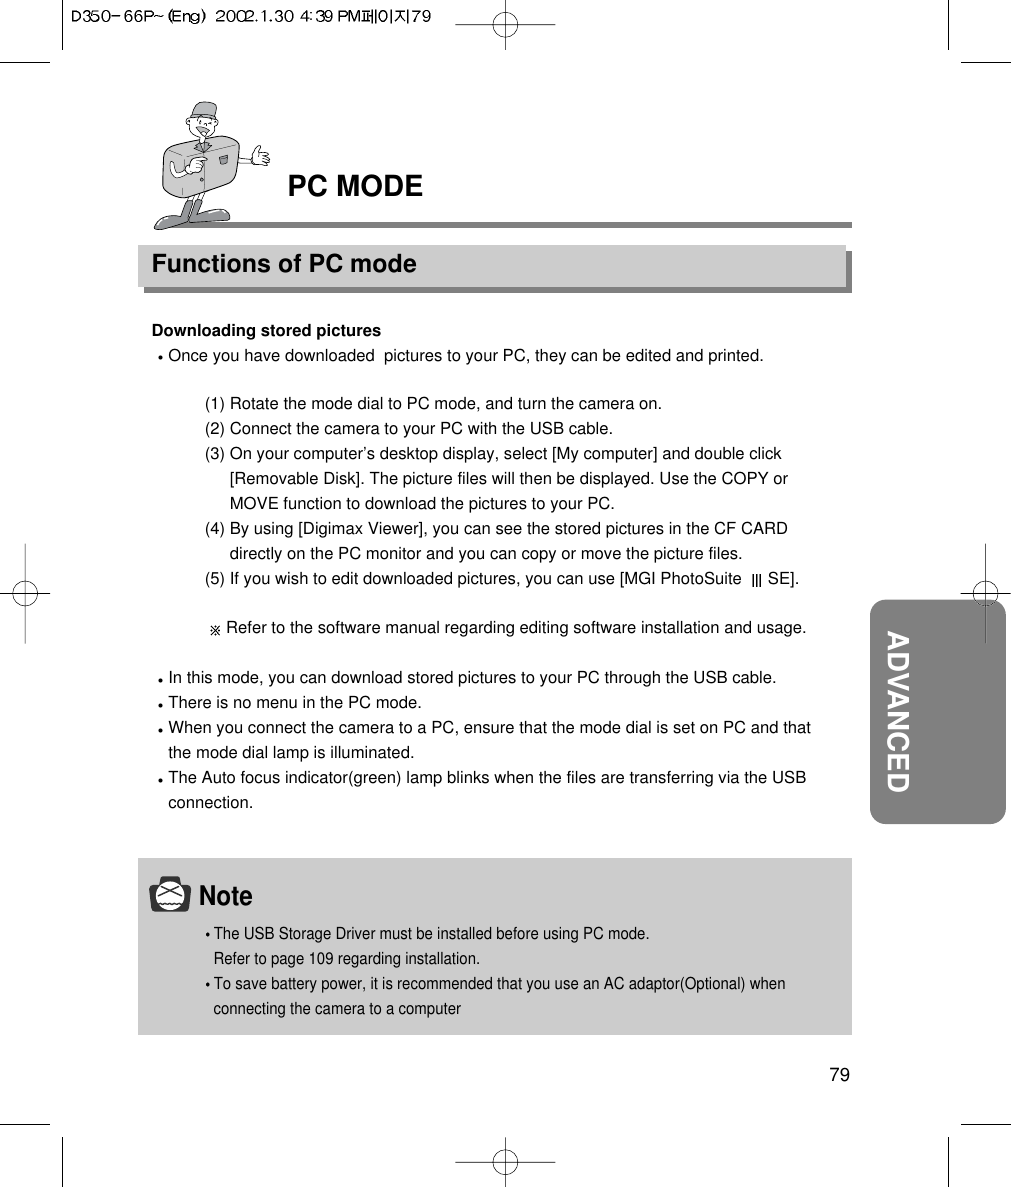 PC MODEFunctions of PC mode79ADVANCEDNoteThe USB Storage Driver must be installed before using PC mode. Refer to page 109 regarding installation.To save battery power, it is recommended that you use an AC adaptor(Optional) whenconnecting the camera to a computerDownloading stored picturesOnce you have downloaded  pictures to your PC, they can be edited and printed.(1) Rotate the mode dial to PC mode, and turn the camera on.(2) Connect the camera to your PC with the USB cable.(3) On your computer’s desktop display, select [My computer] and double click[Removable Disk]. The picture files will then be displayed. Use the COPY orMOVE function to download the pictures to your PC.(4) By using [Digimax Viewer], you can see the stored pictures in the CF CARDdirectly on the PC monitor and you can copy or move the picture files.(5) If you wish to edit downloaded pictures, you can use [MGI PhotoSuite  SE].Refer to the software manual regarding editing software installation and usage.In this mode, you can download stored pictures to your PC through the USB cable.There is no menu in the PC mode.When you connect the camera to a PC, ensure that the mode dial is set on PC and thatthe mode dial lamp is illuminated.The Auto focus indicator(green) lamp blinks when the files are transferring via the USBconnection.